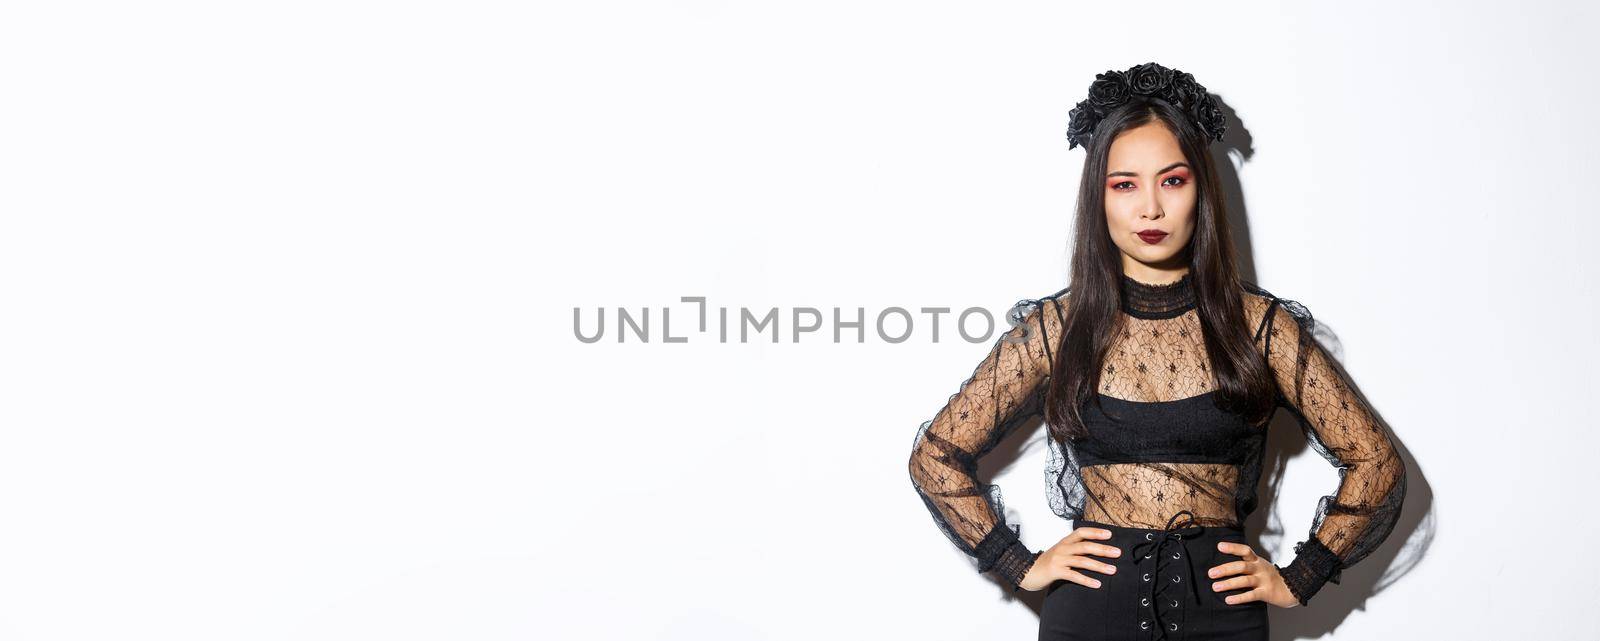 Attractive asian woman in halloween costume looking disappointed and skeptical. Female in black lace dress and wreath looking arrogant, trick or treat in witch outfit, standing white background.